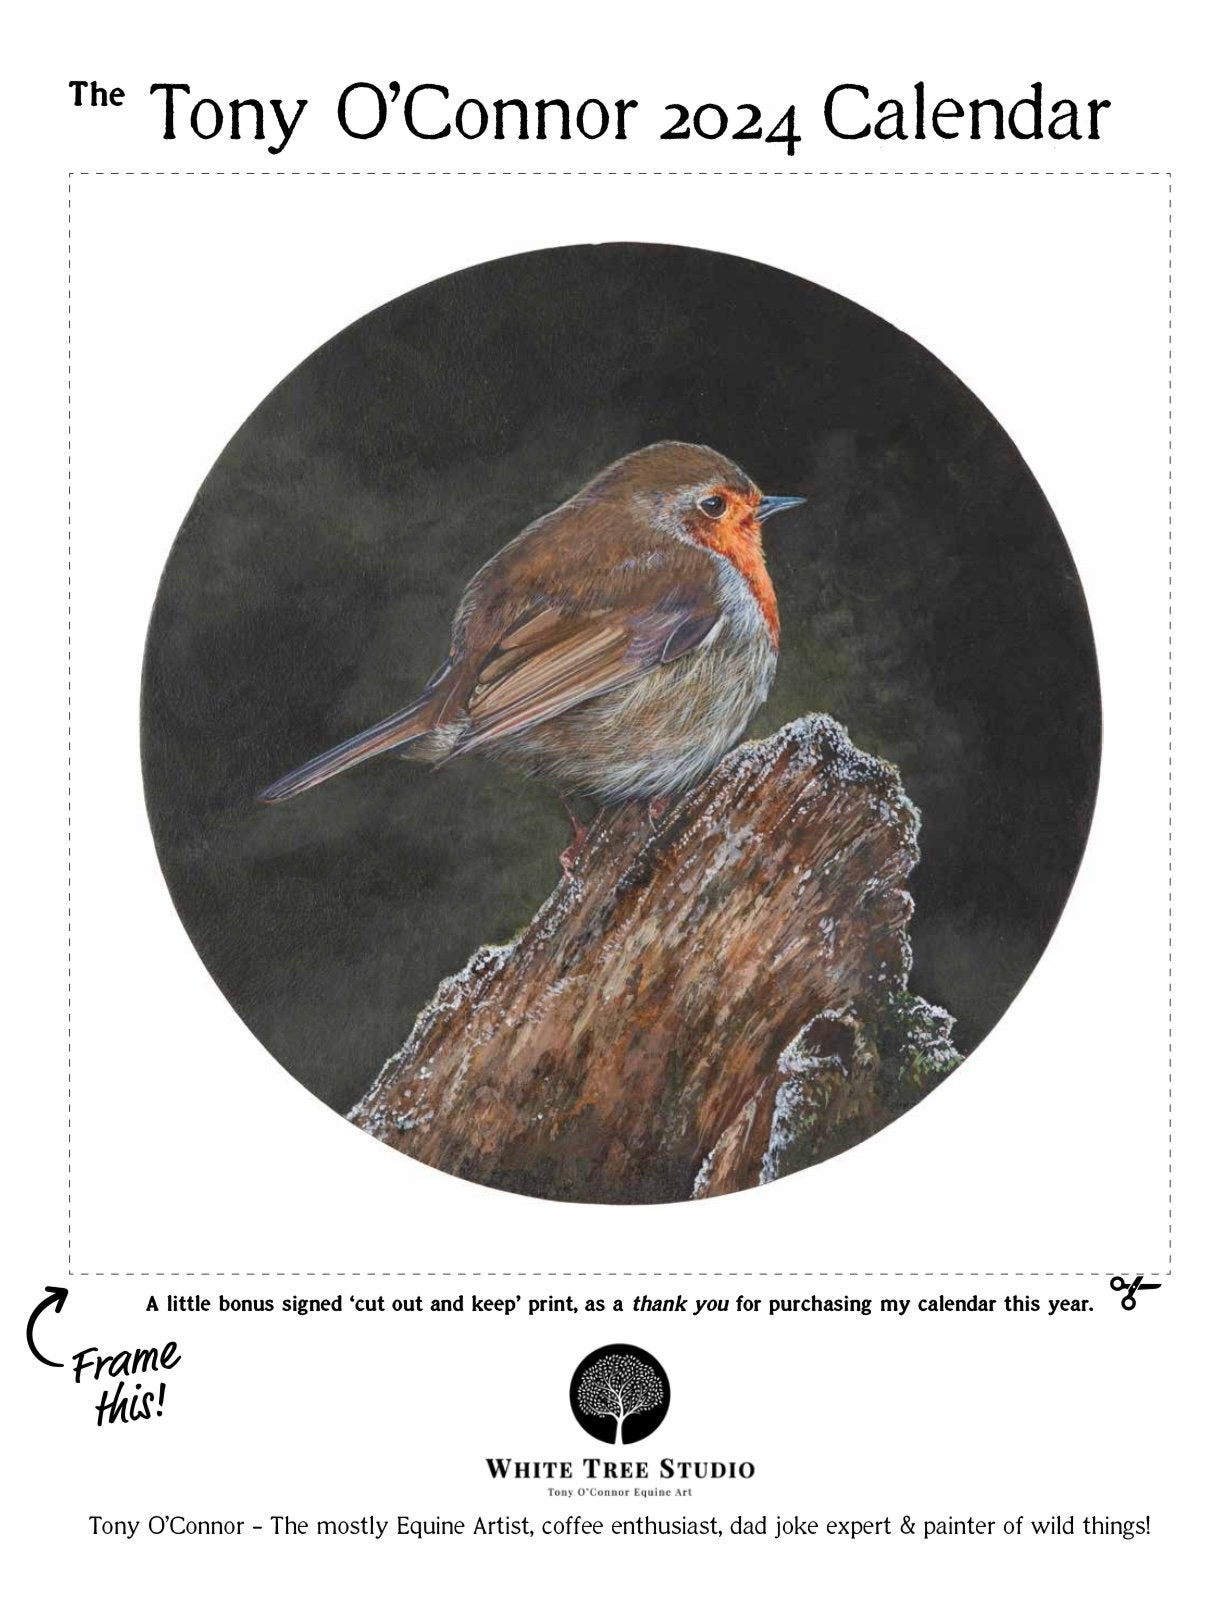 Back cover featuring cute robin image entitle 'O na Scathanna' which translates as 'From the Shadows'